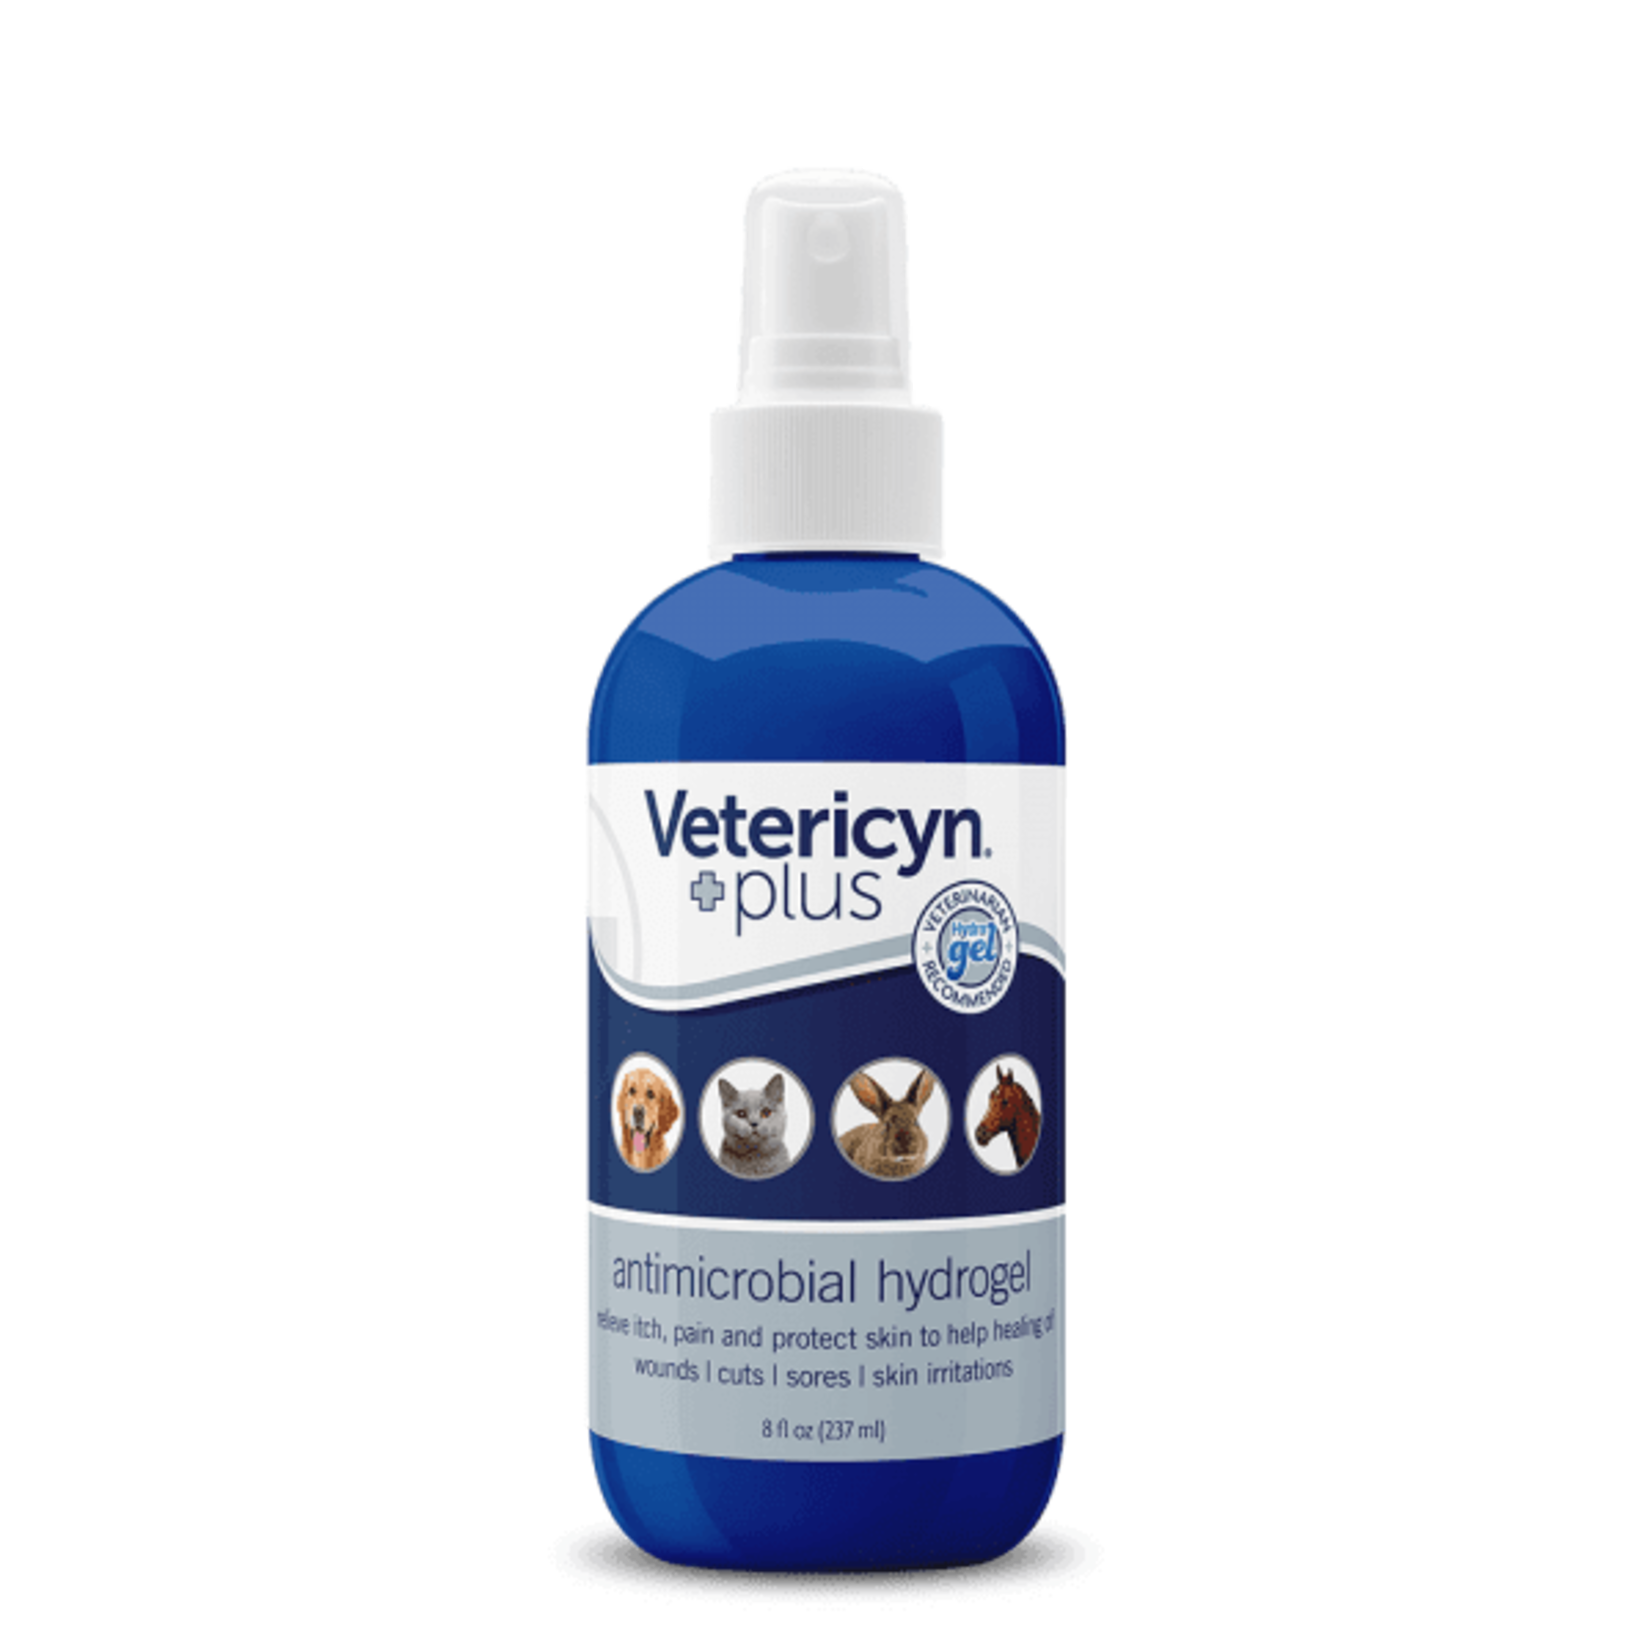 Vetericyn Vetericyn Plus Antimicrobial Hydrogel for Hot Spots, Wounds, Rashes, Cuts, Skin Irritation3oz